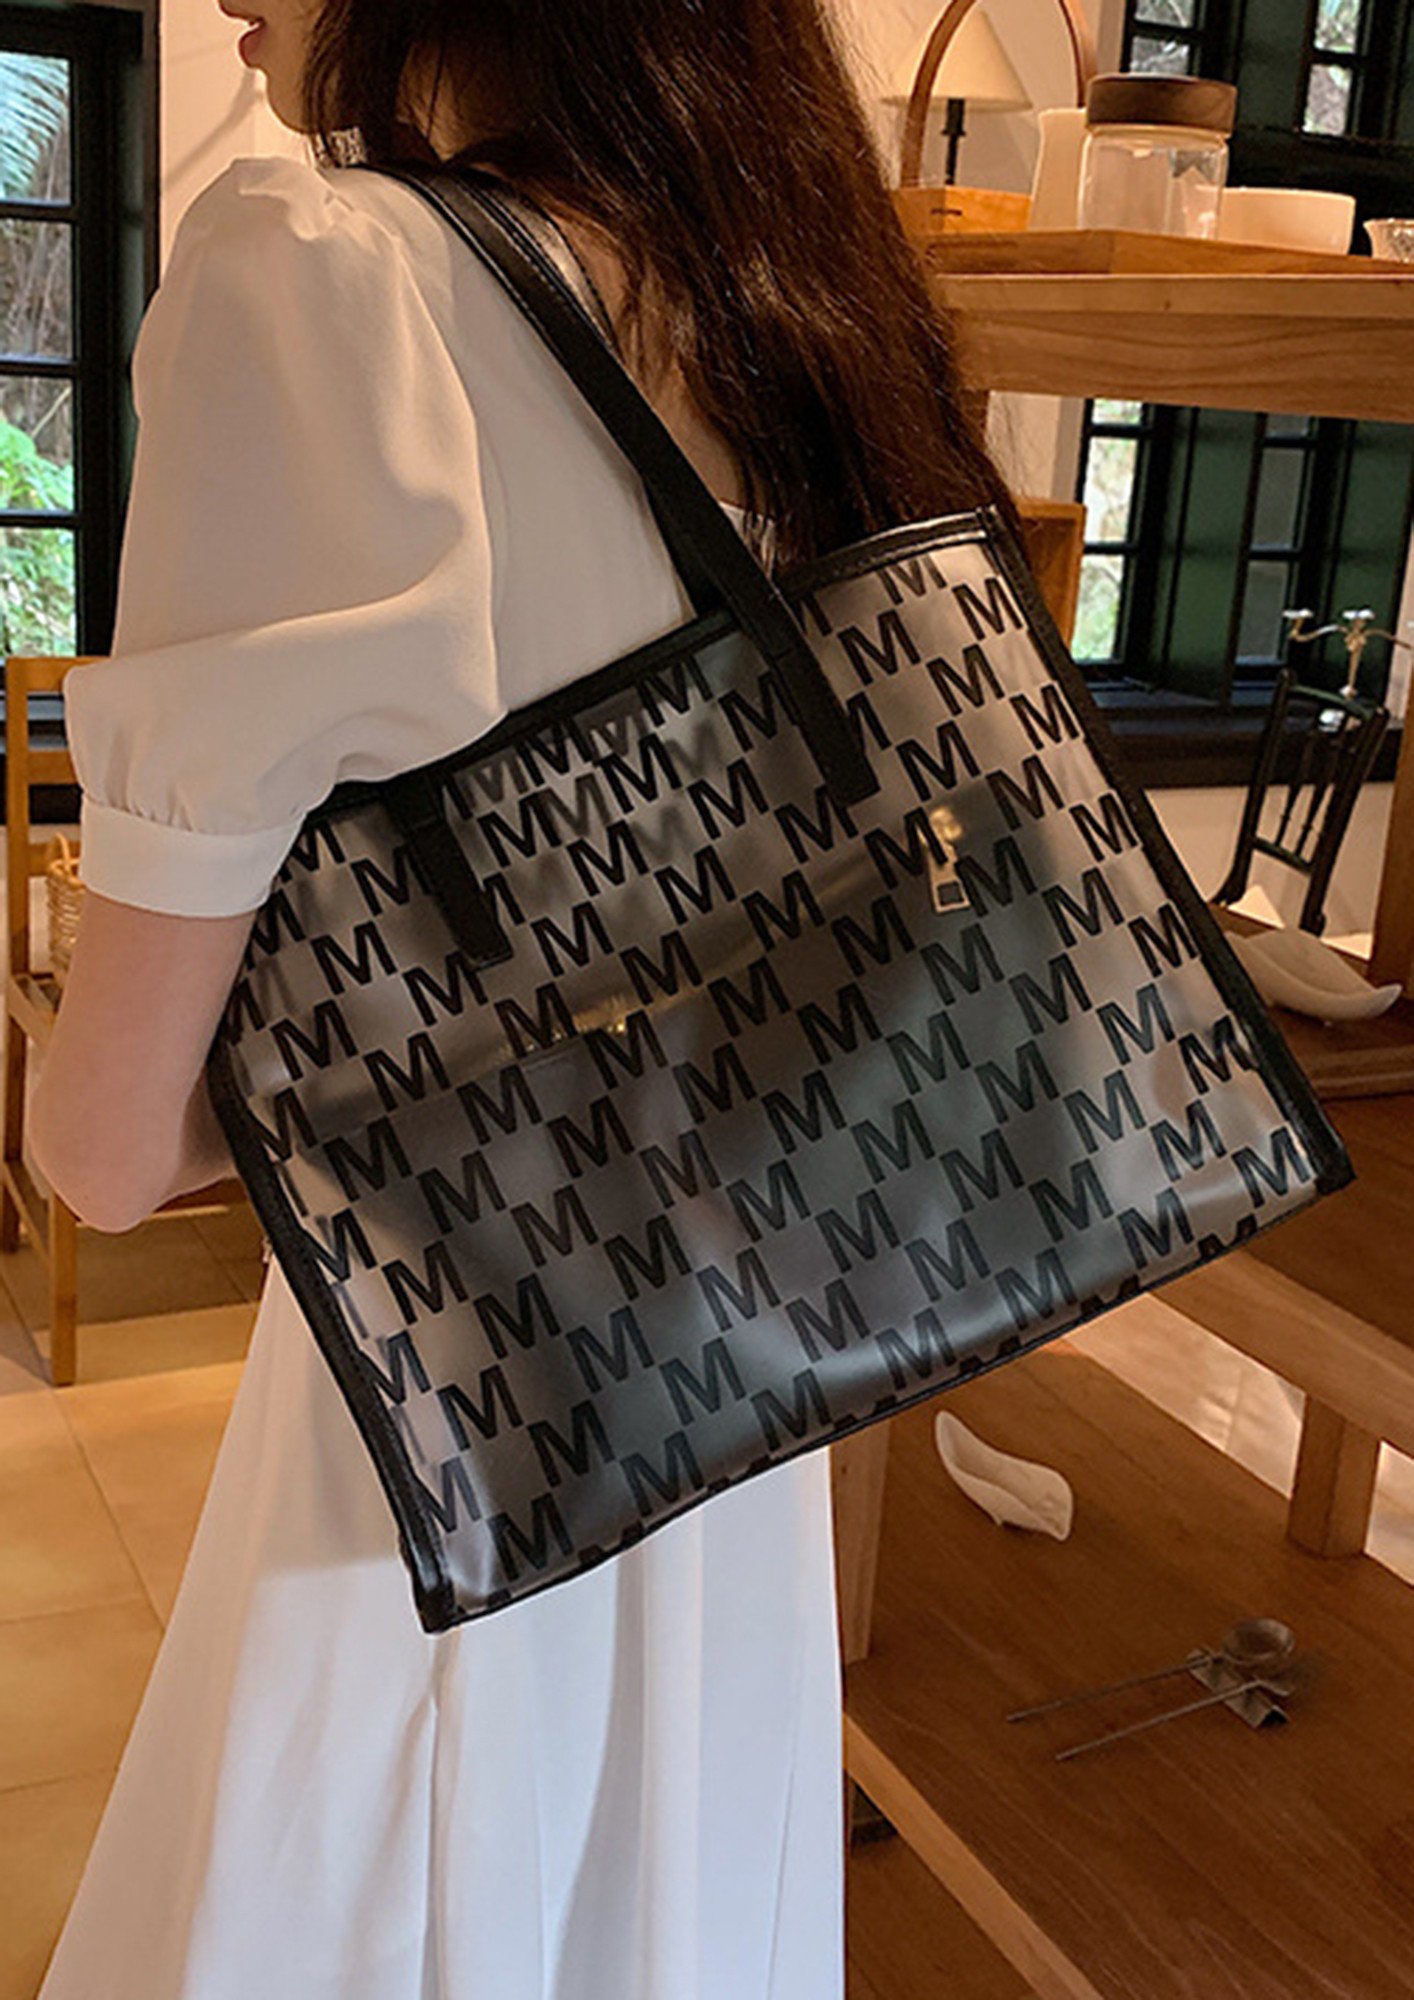 Buy Tote Bag Louis Vuitton Online In India -  India